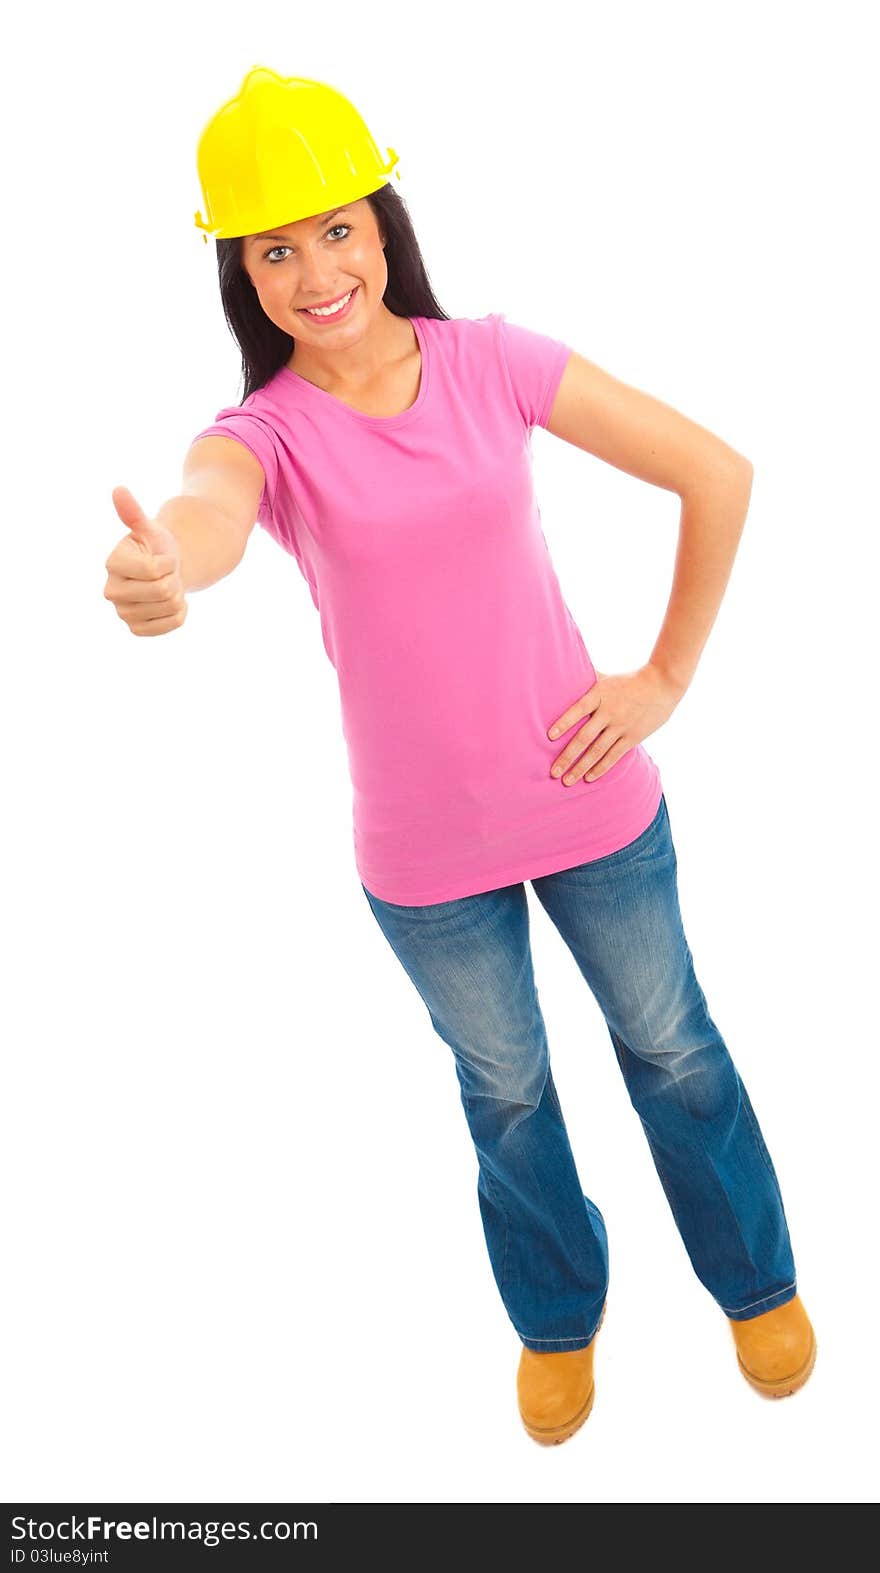 A young female dressed in blue jeans and pink top and yellow hard hat giving the thumbs up sign. A young female dressed in blue jeans and pink top and yellow hard hat giving the thumbs up sign